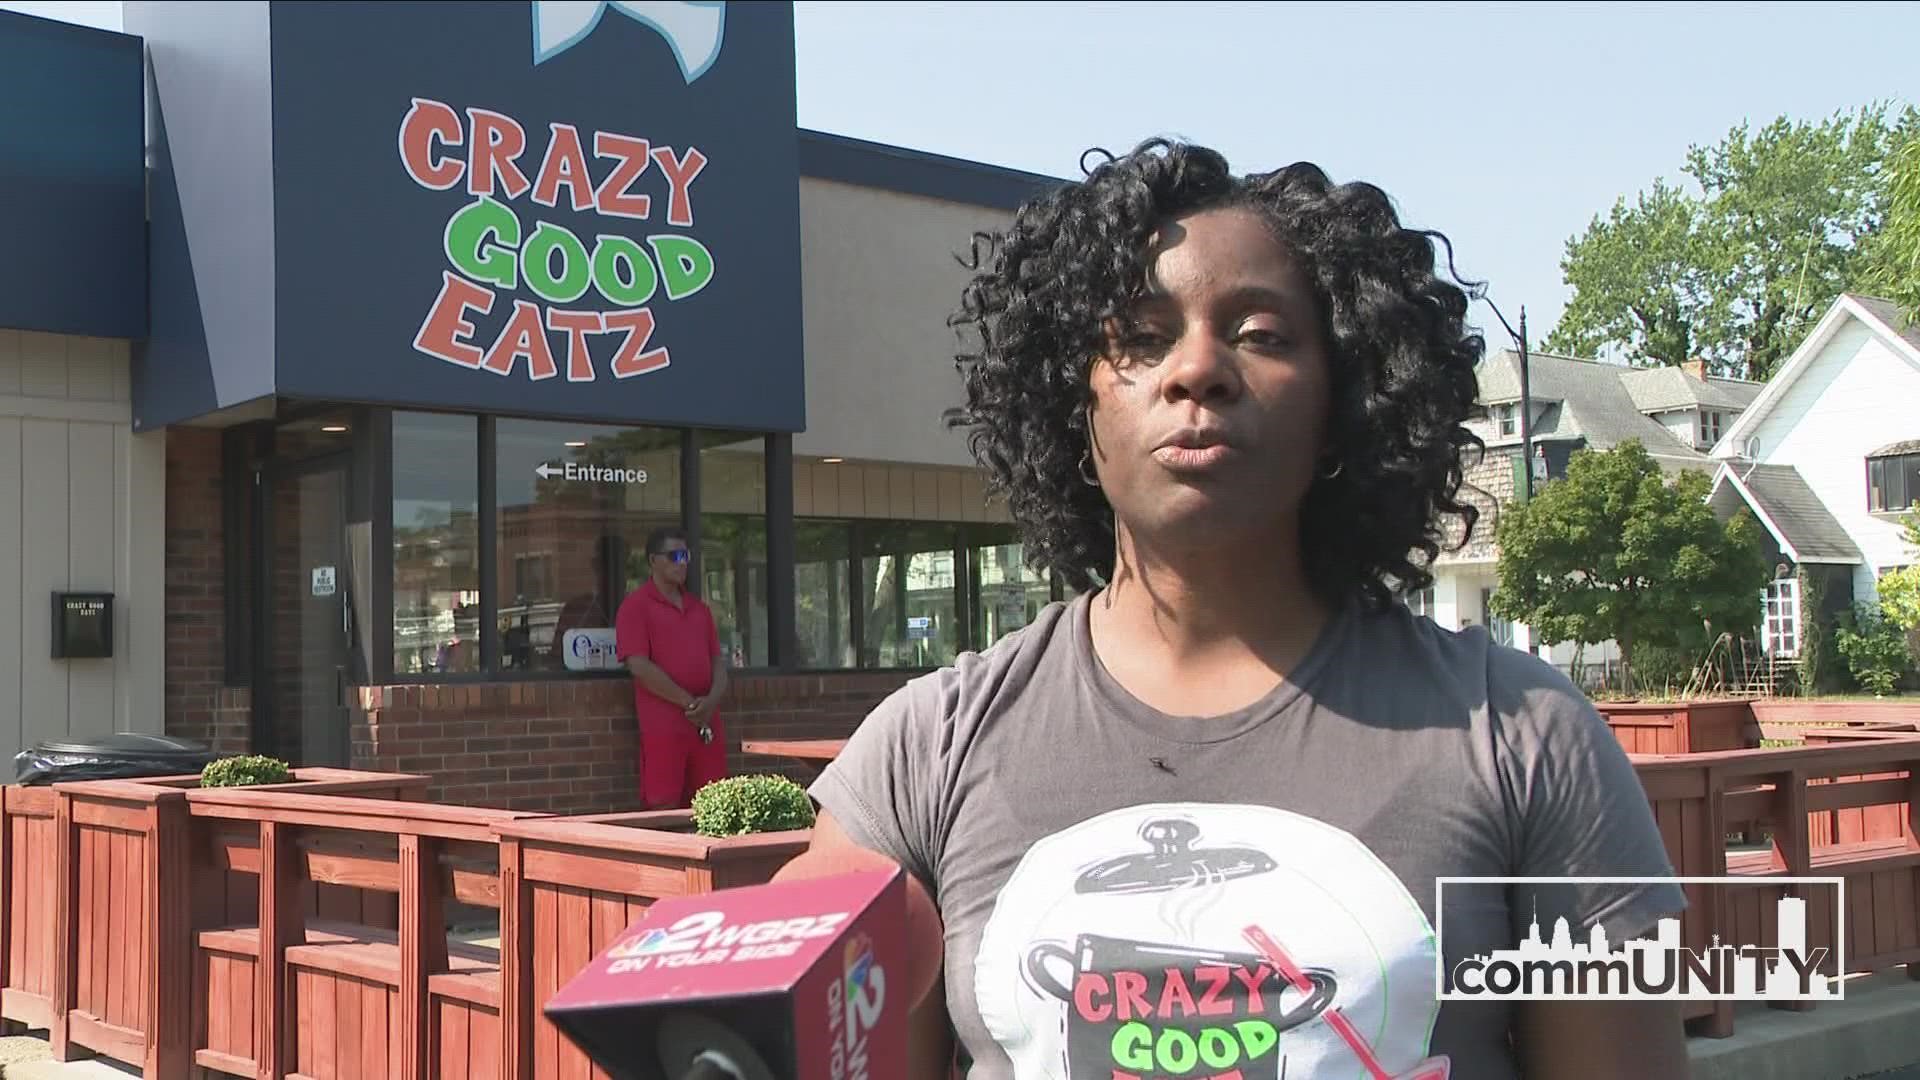 Crazy Good Eatz is located on Main Street at the old Tony's Ranch House. It's a new lunch spot and a Black-owned business.